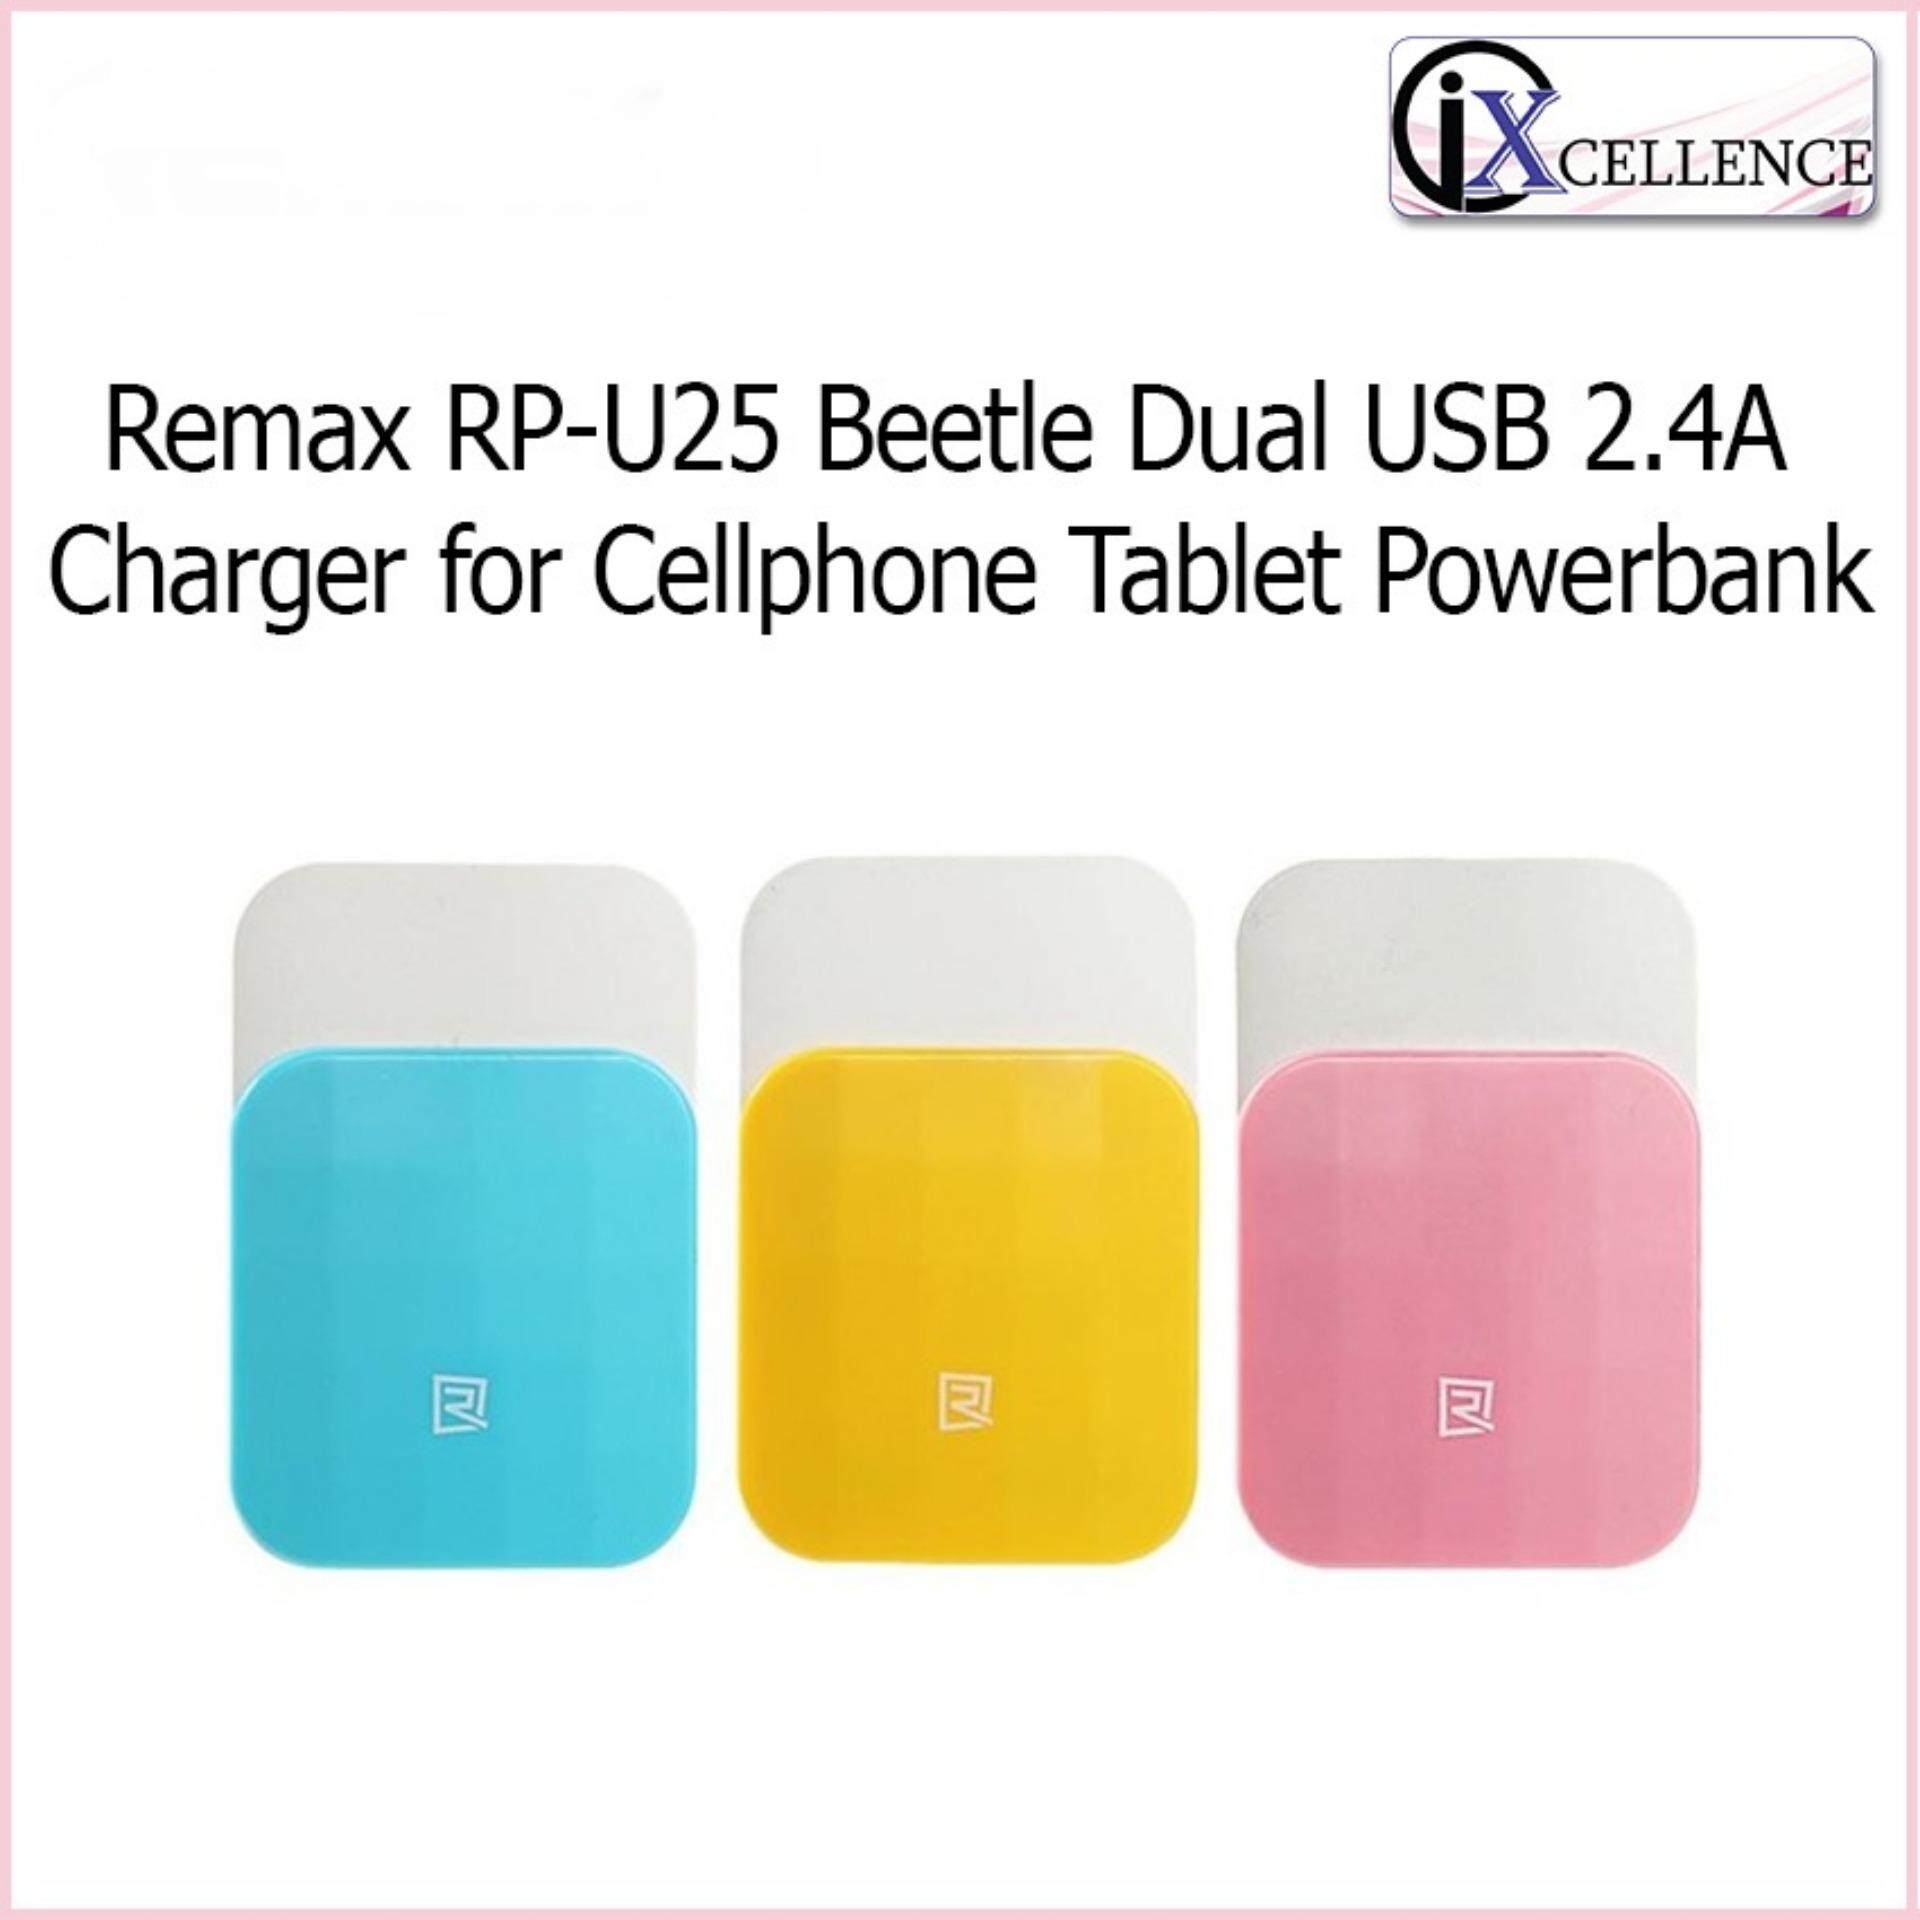 [IX] Remax RP-U25 Beetle Dual USB 2.4A Charger for Cellphone Tablet Powerbank (Pink)